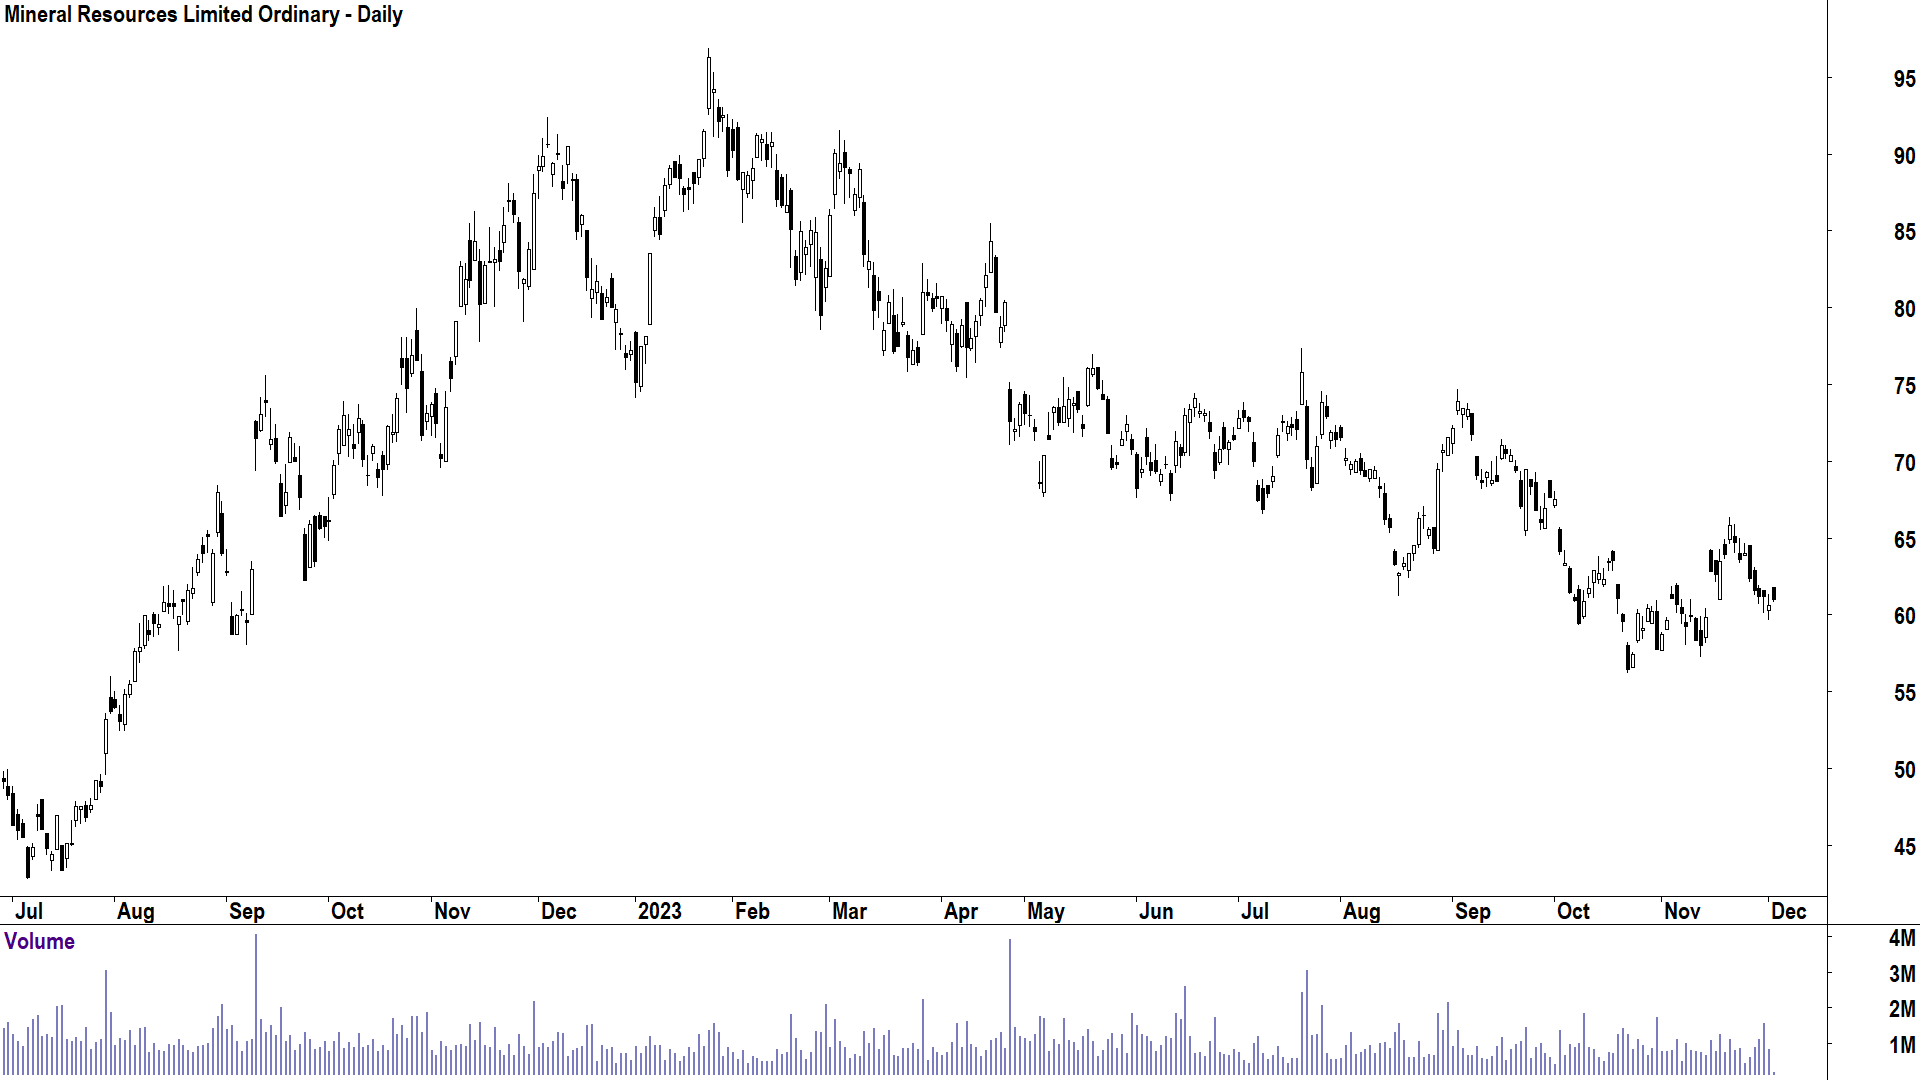 Mineral Resources (MIN) chart